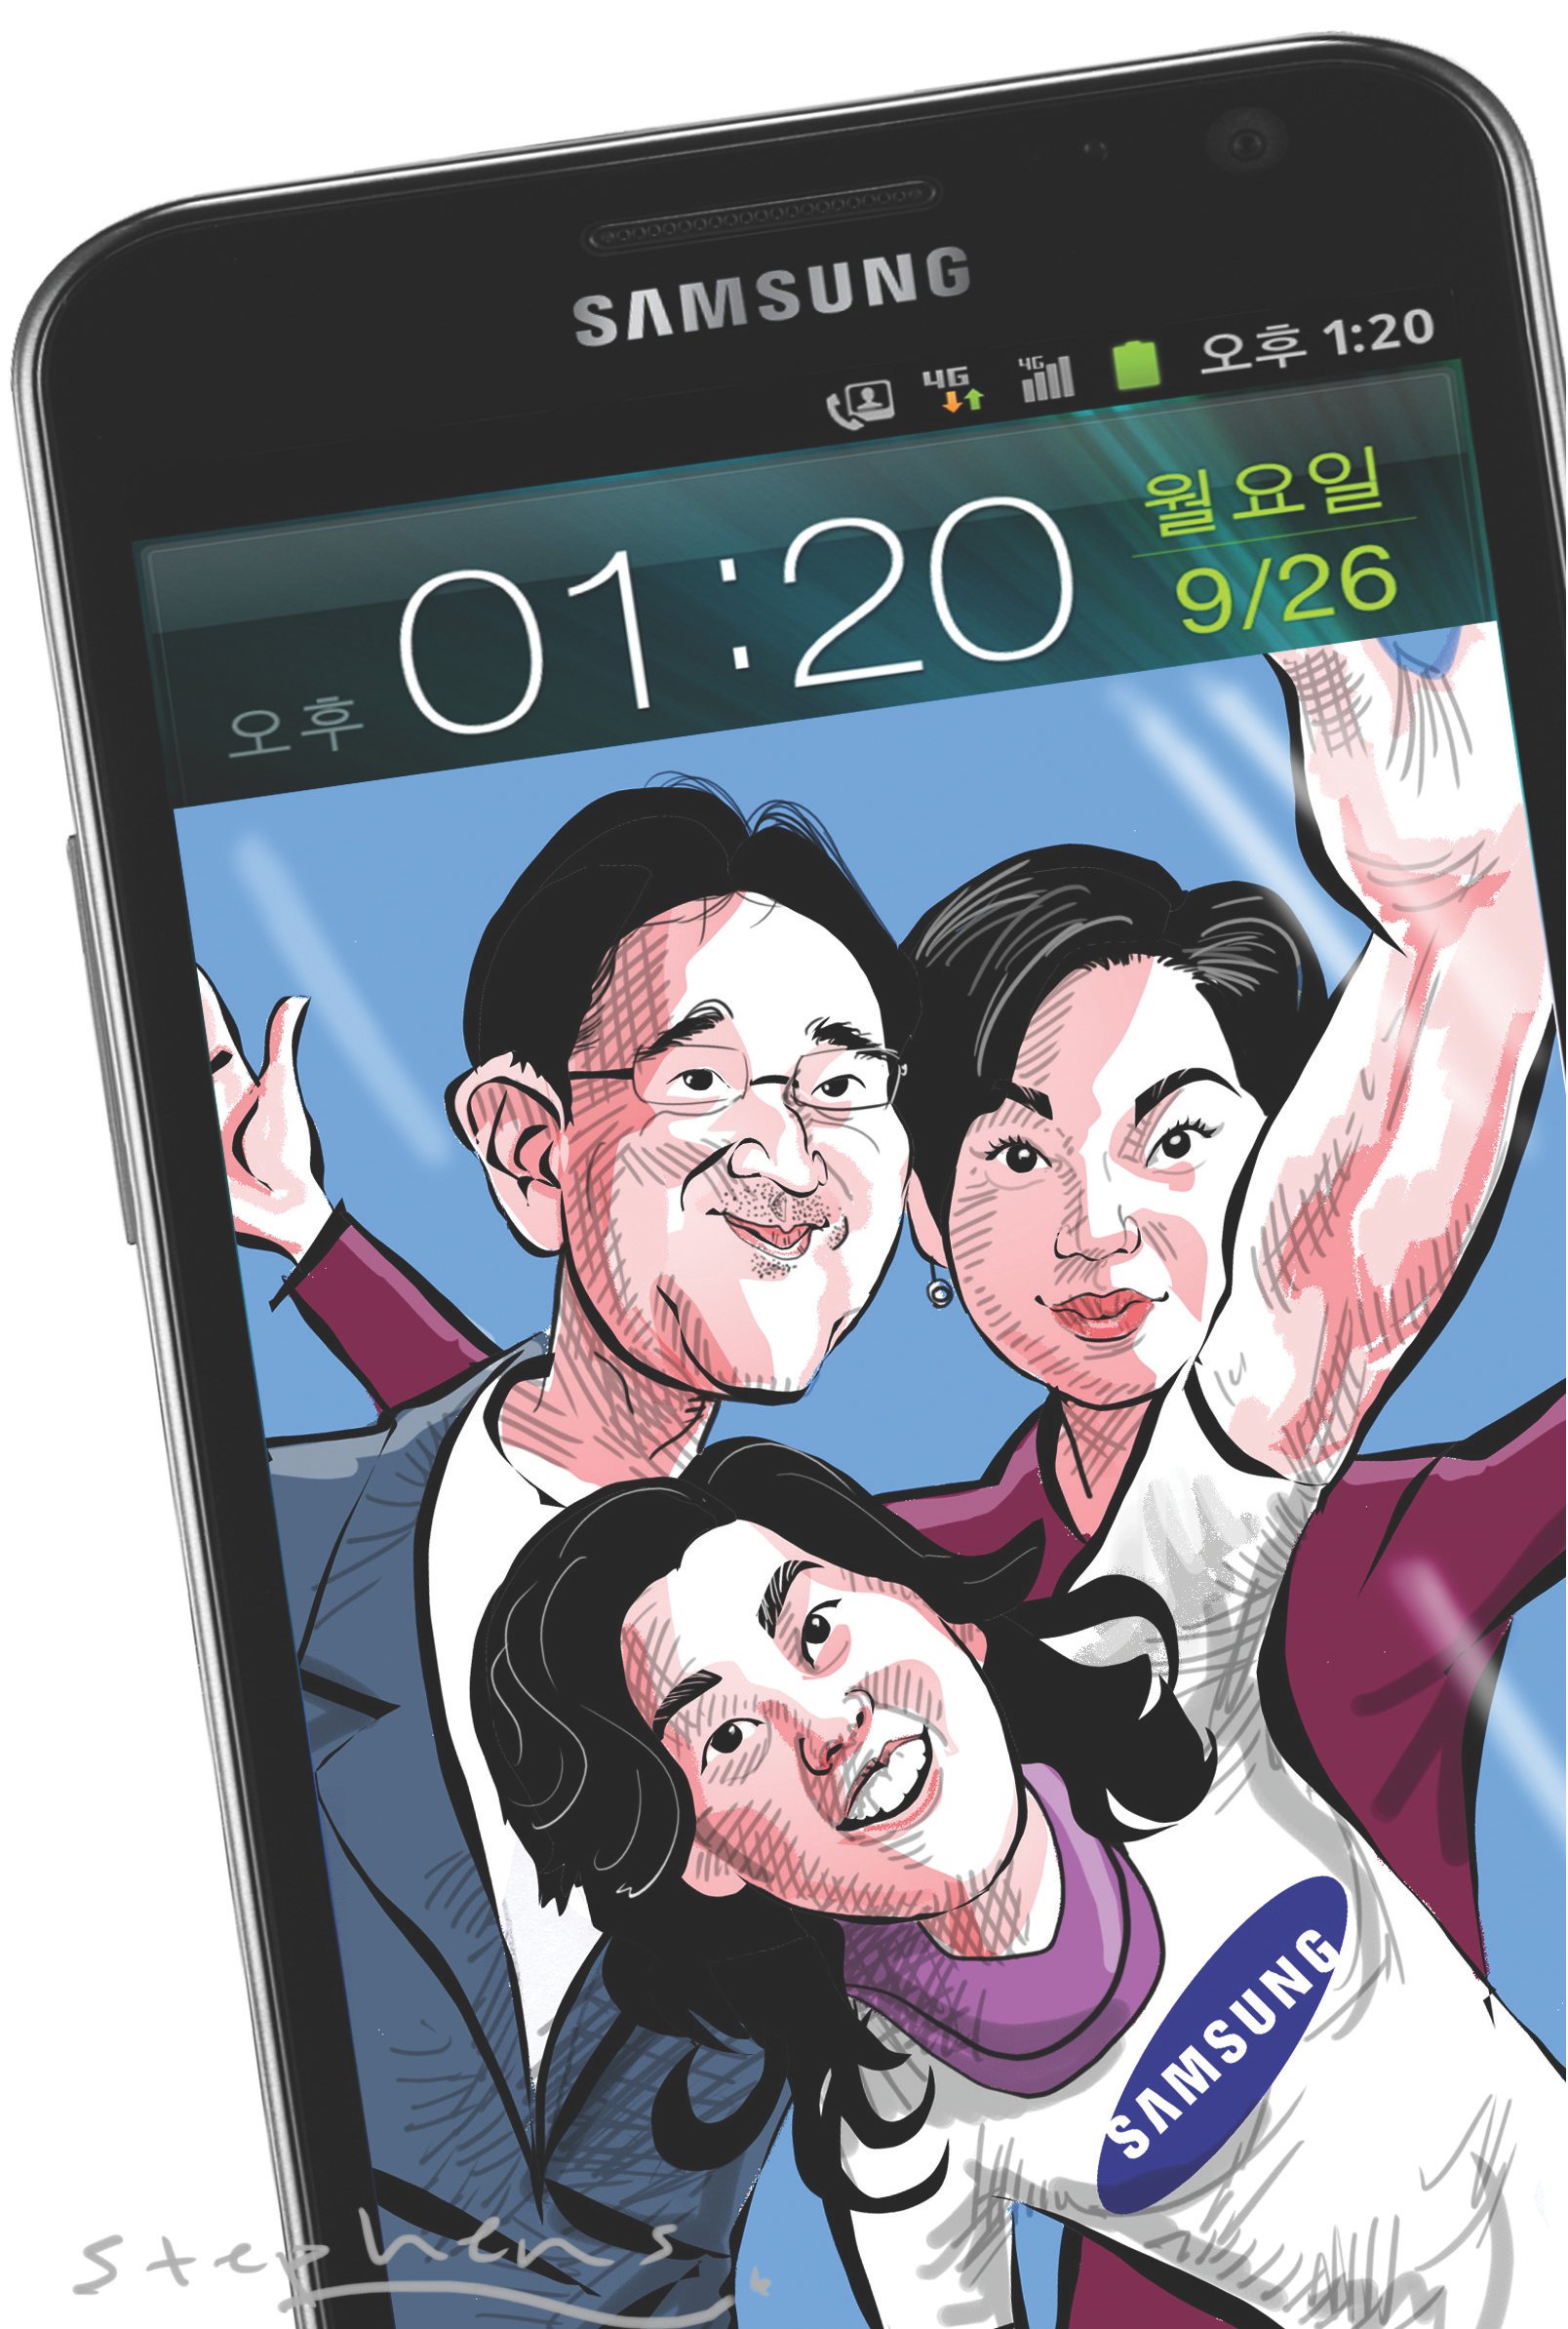 Samsung heir Lee Jae-yong's sisters also have roles in the Samsung empire.  Illustration: Craig Stephens